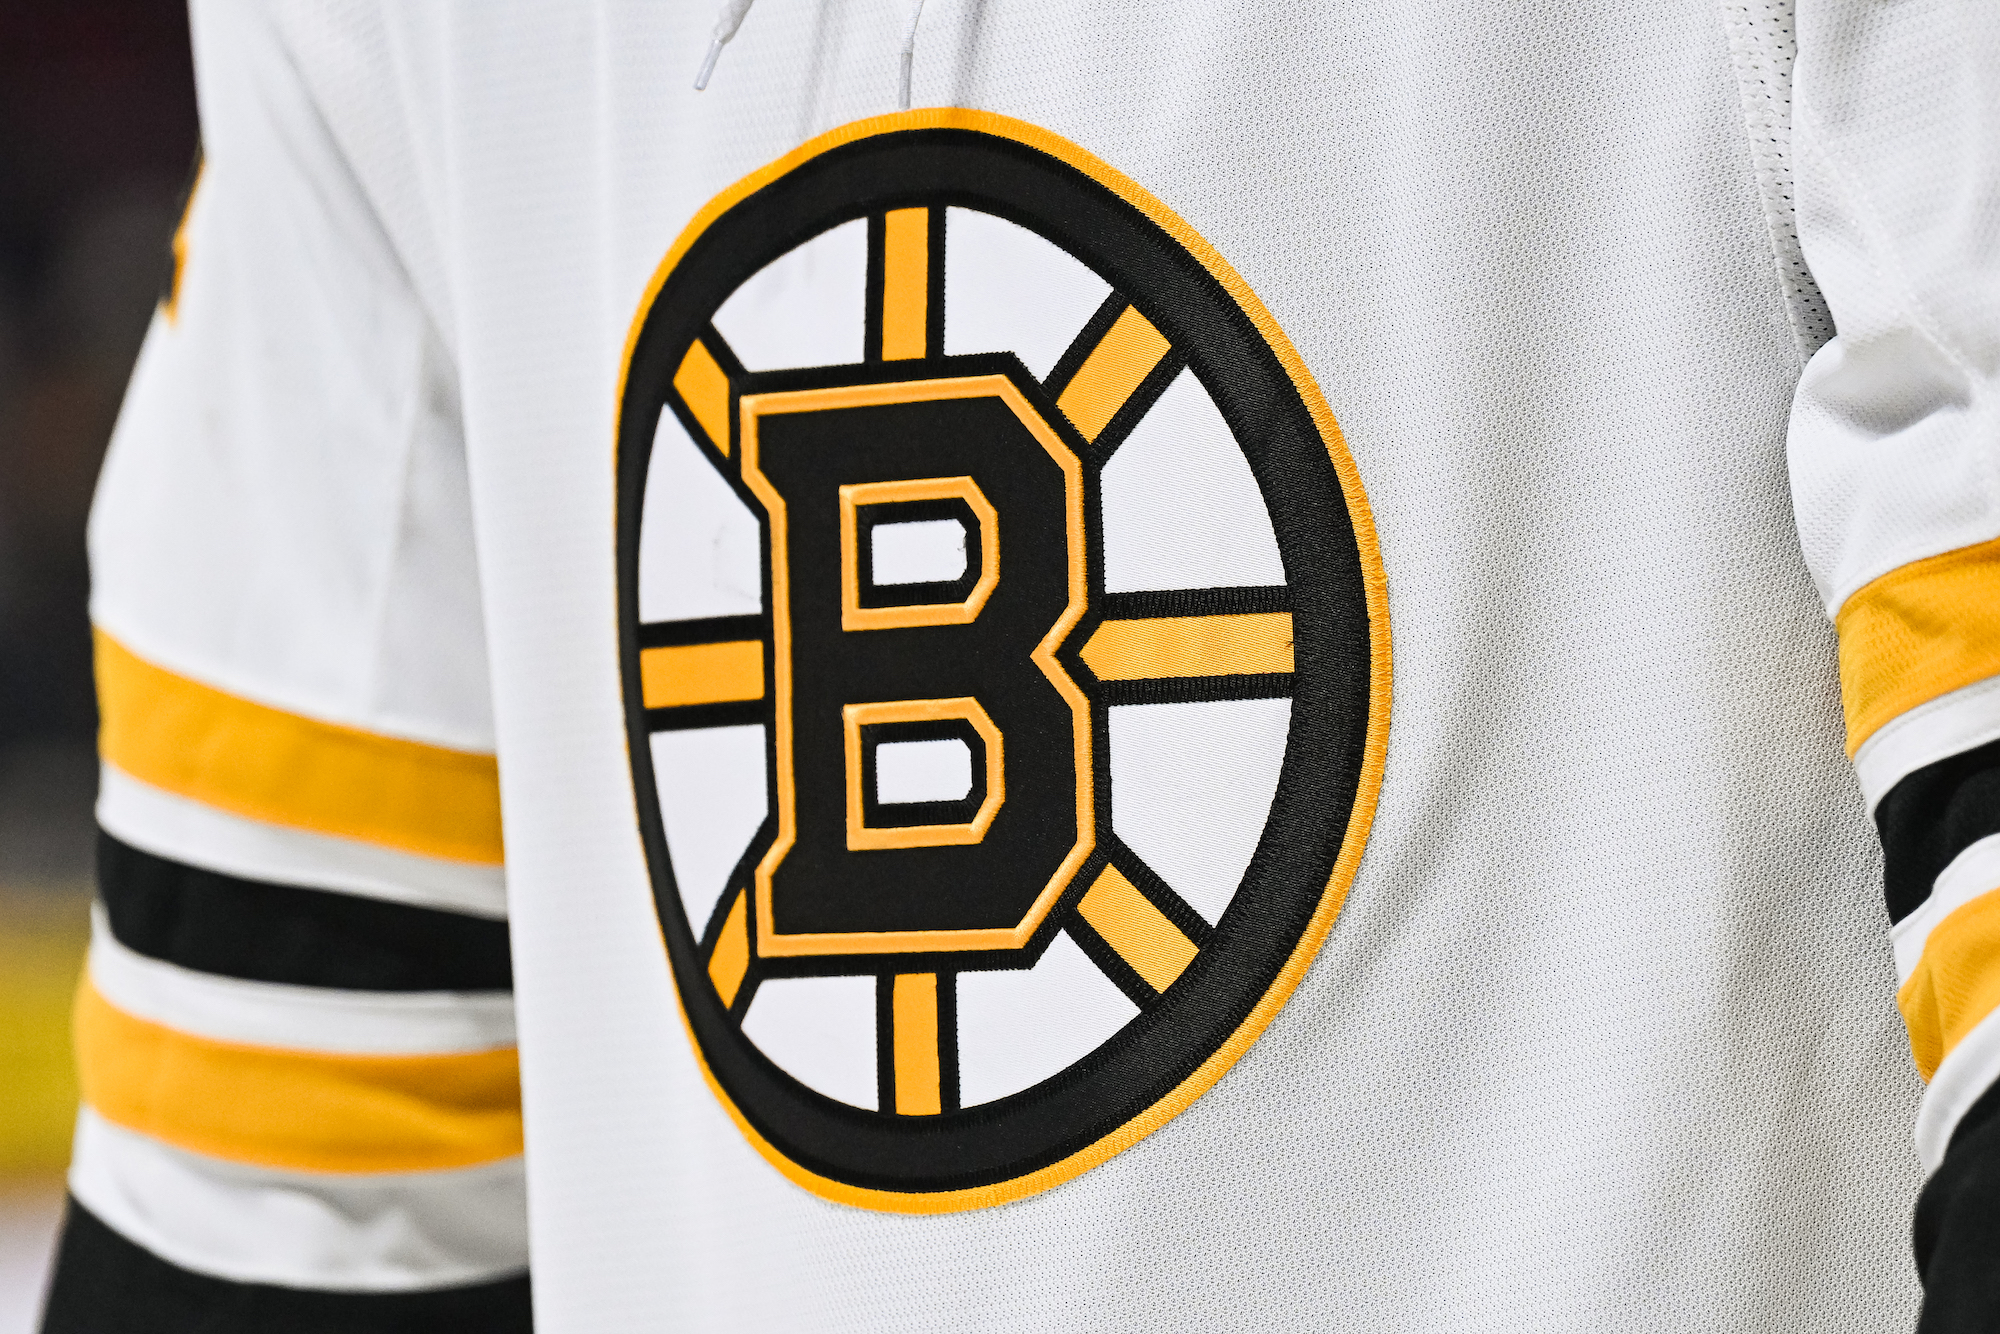 MONTREAL, QC - MARCH 21: View of a Boston Bruins logo on a jersey worn by a member of the team at warm-up before the Boston Bruins versus the Montreal Canadiens game on March 21, 2022 at Bell Centre in Montreal, QC (Photo by David Kirouac/Icon Sportswire)